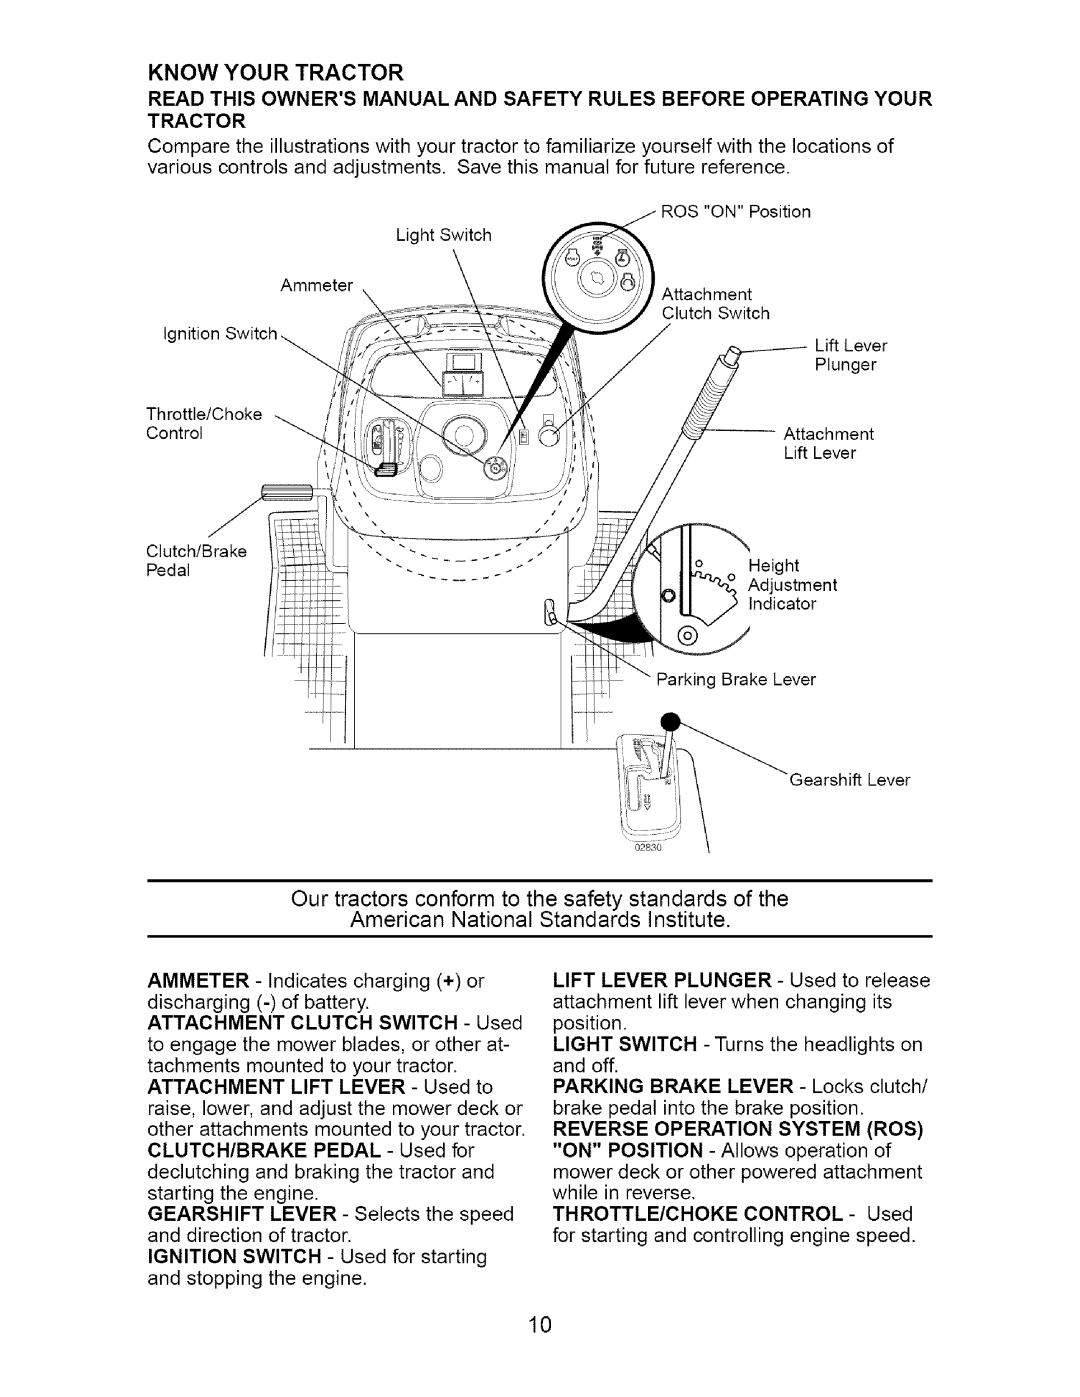 Craftsman 917.275632 manual Know Your Tractor, American National Standards Institute 